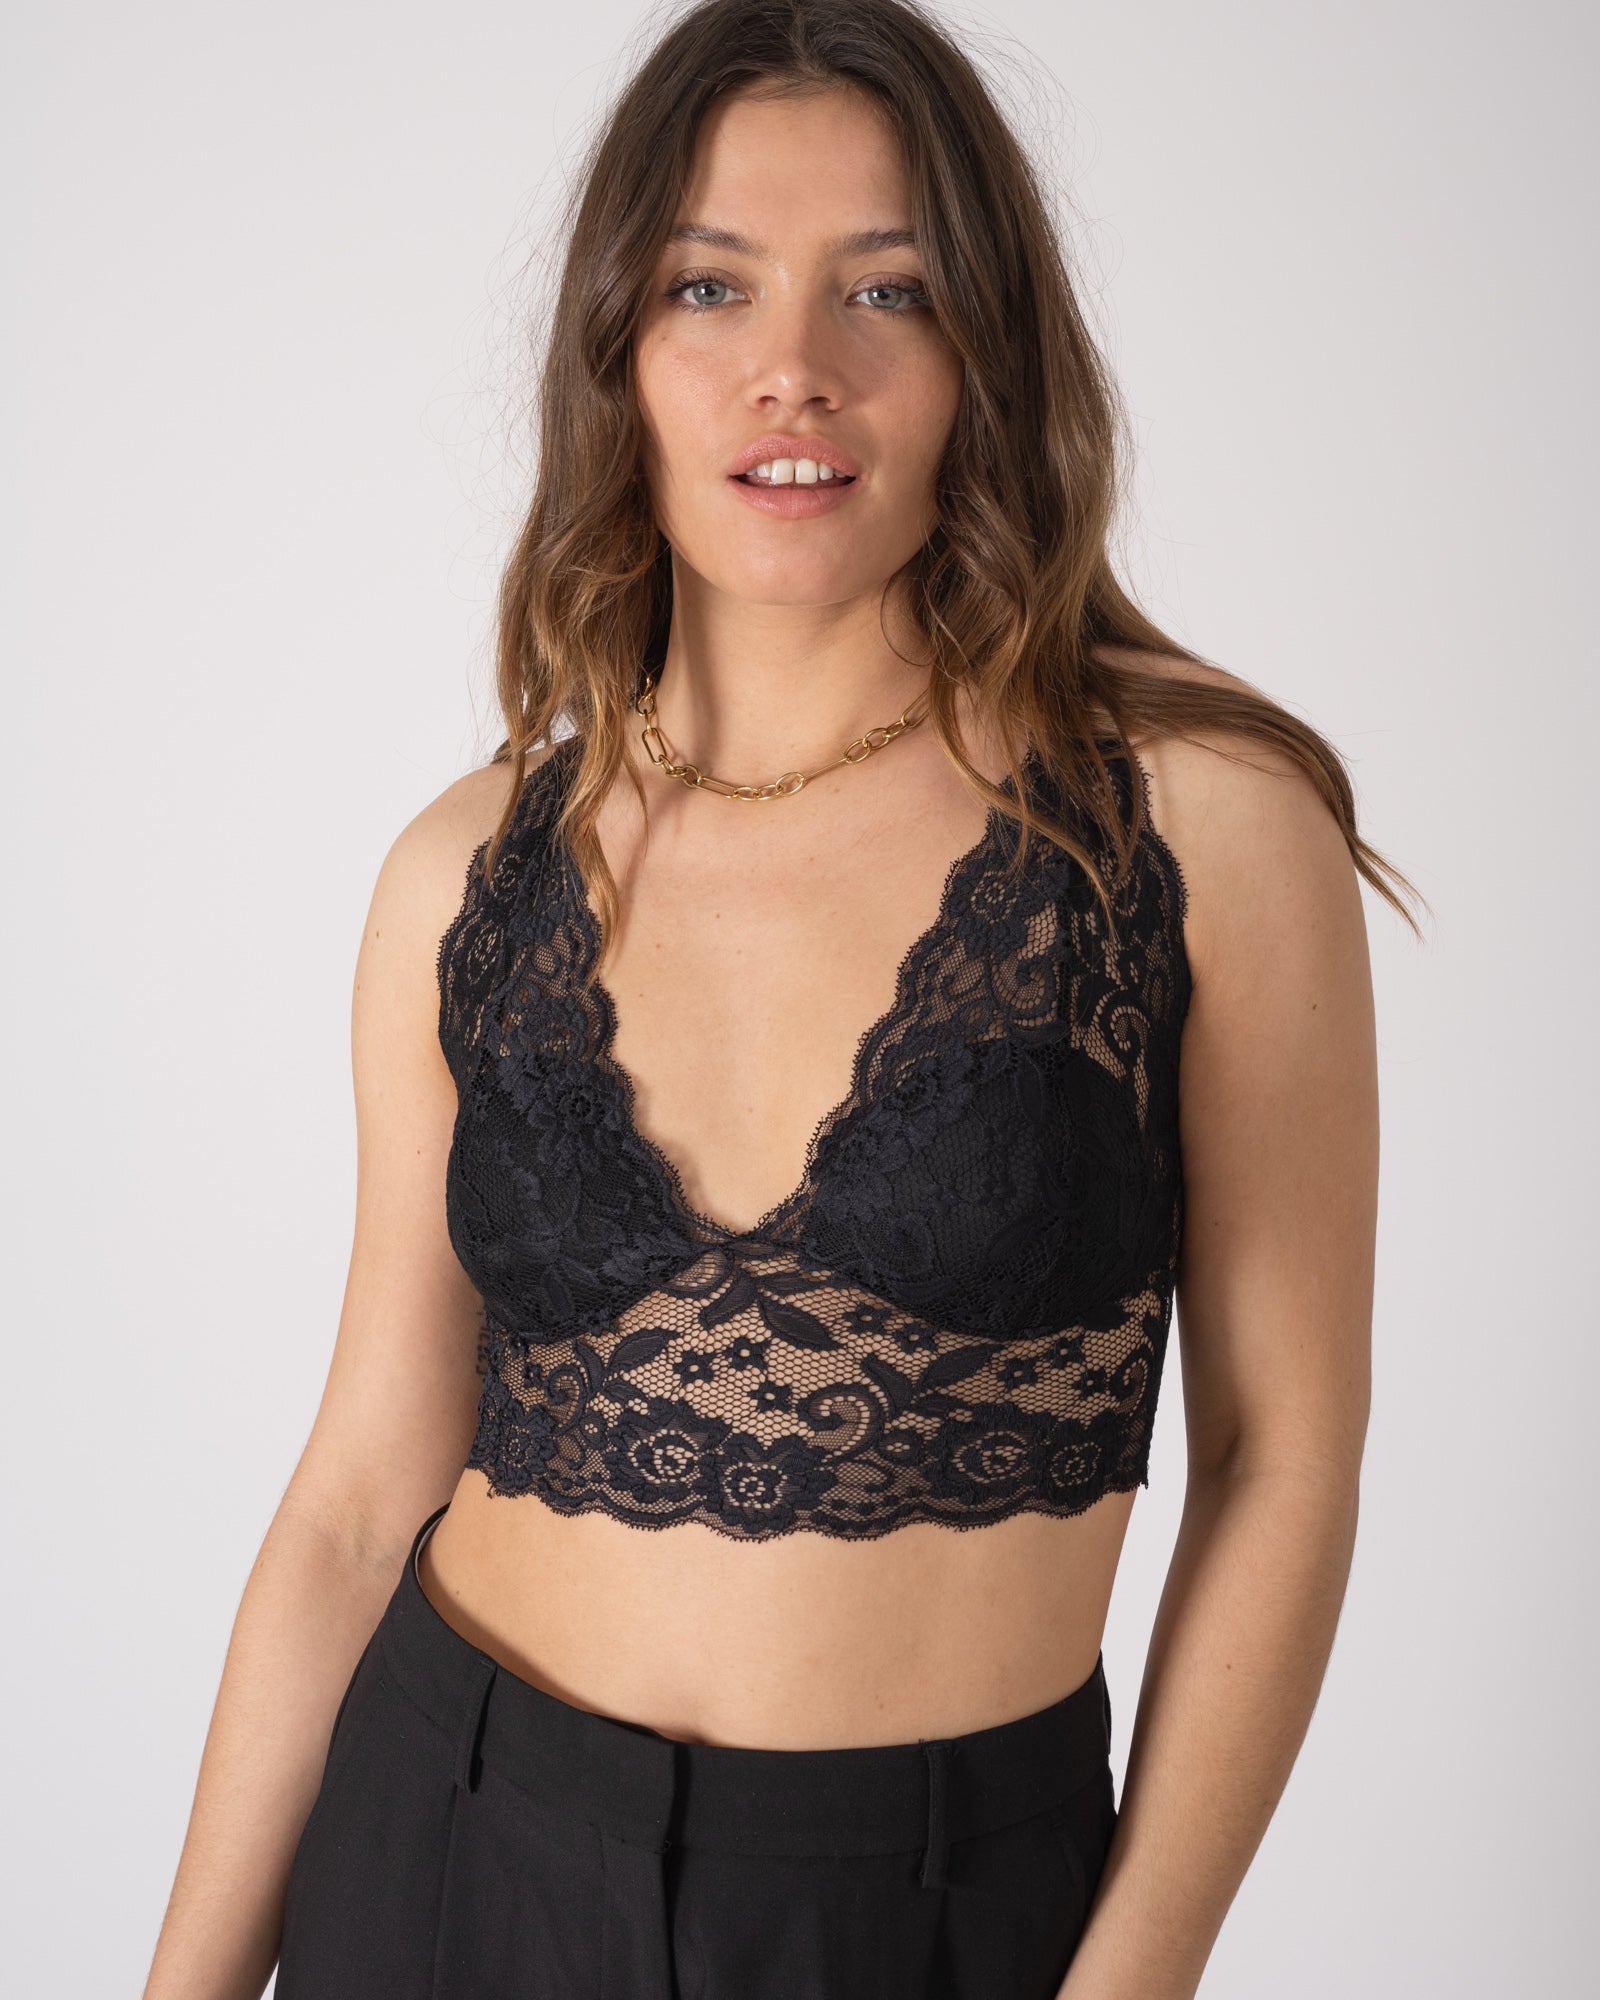 TILTIL Giselle Lace Bra Black One Size – Things I Like Things I Love